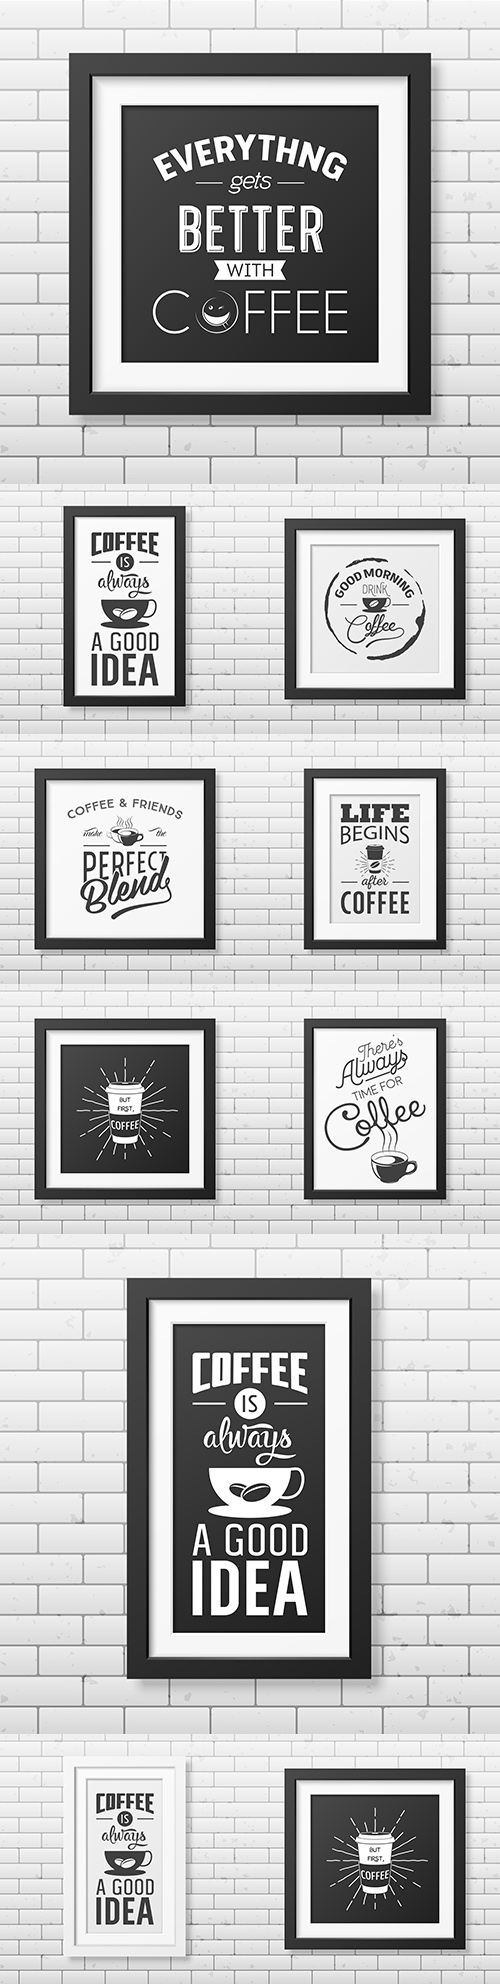 Coffee quote typographic in realistic square frame on brick wall